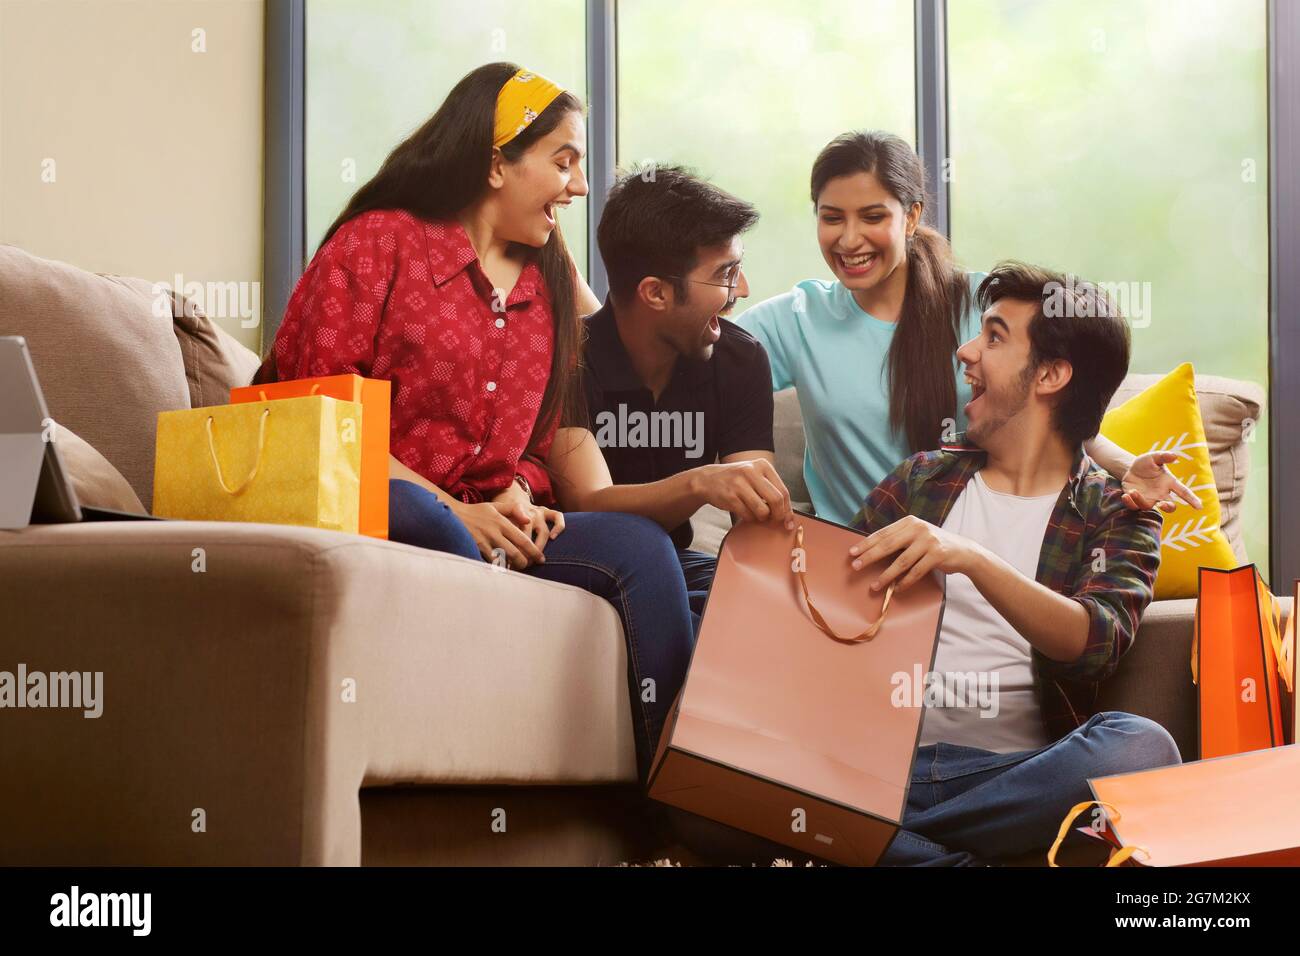 A Group of youngsters talking happily in living room after a shopping spree. Stock Photo